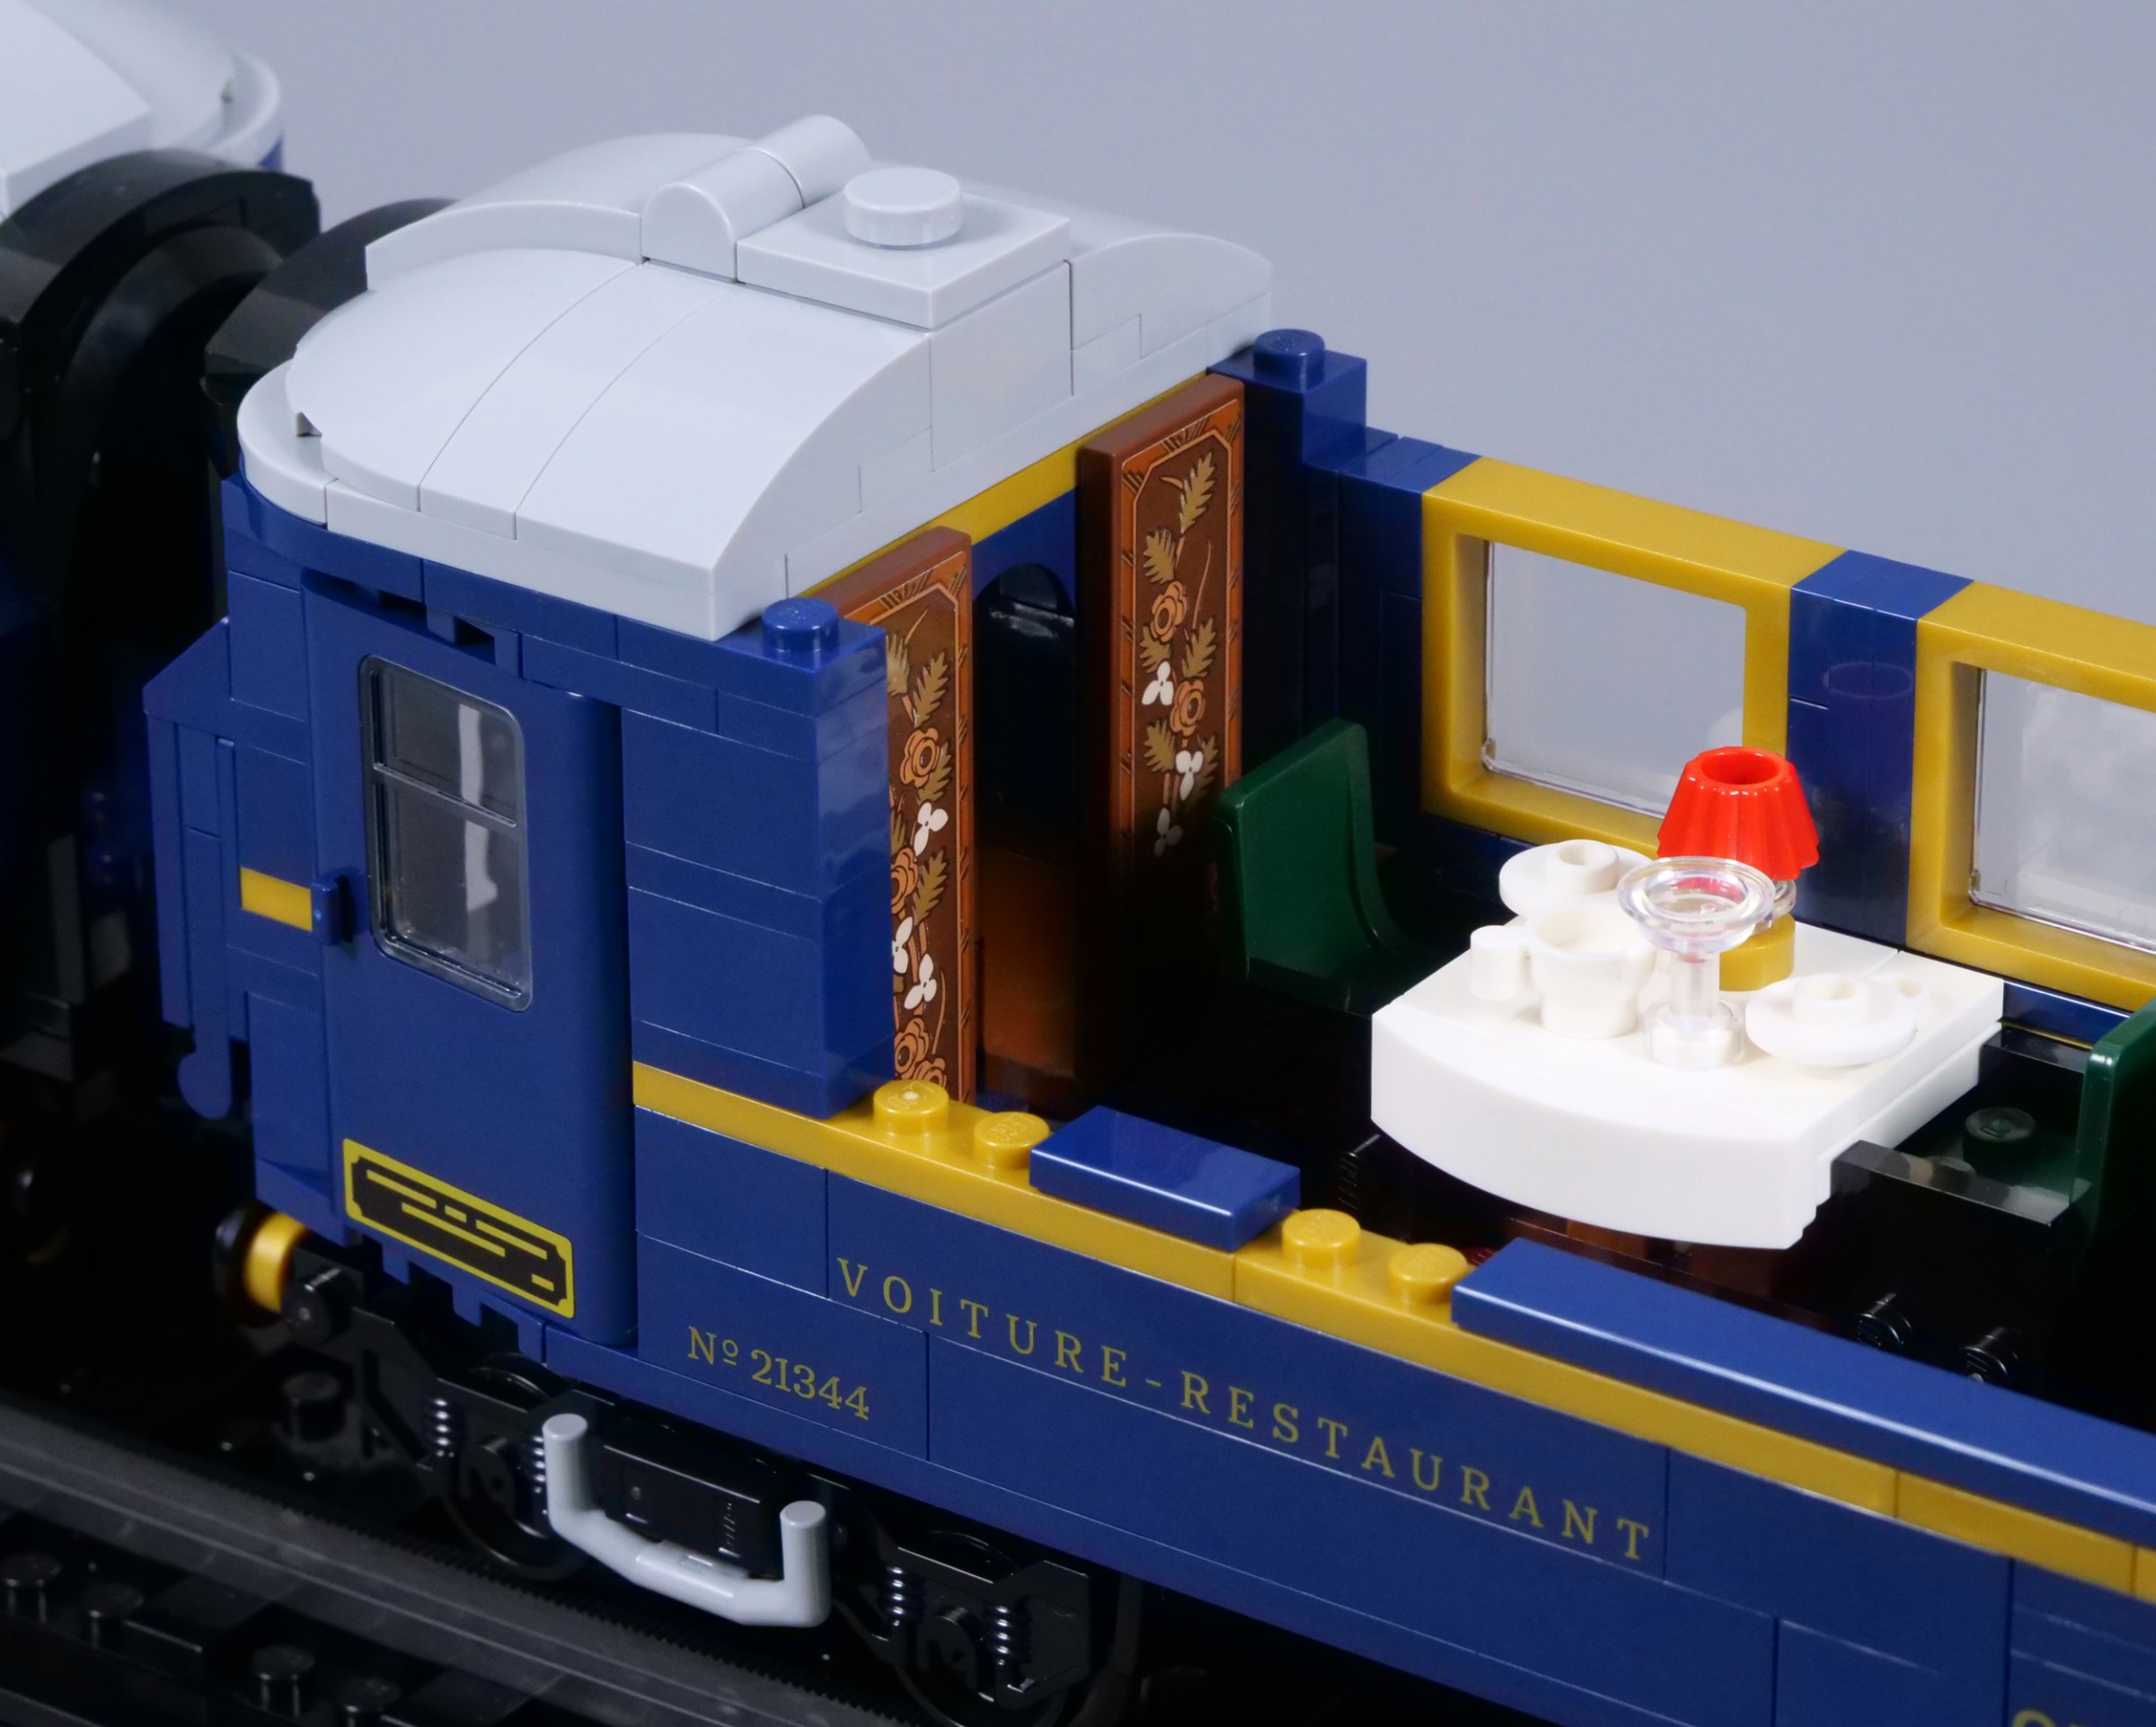 LEGO Ideas The Orient Express (21344) Review - The Brick Fan